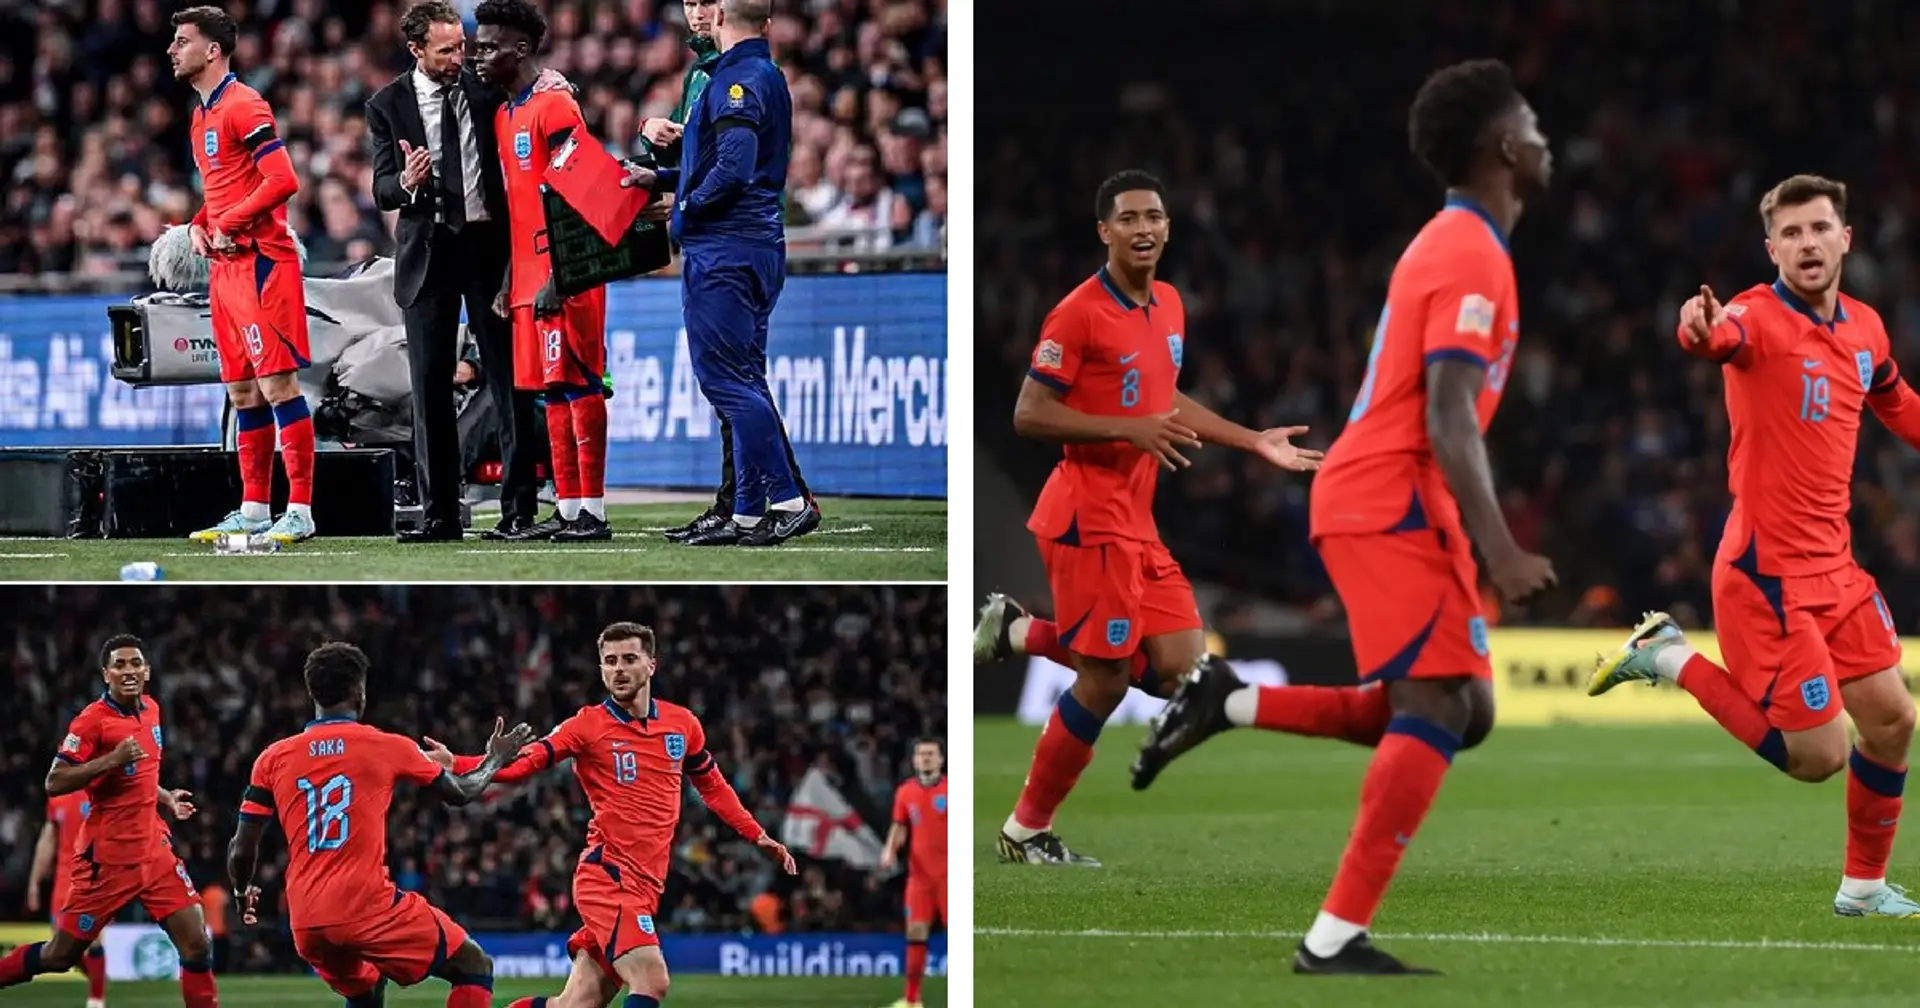 Saka magic and two other positives for Arsenal in England's draw with Germany